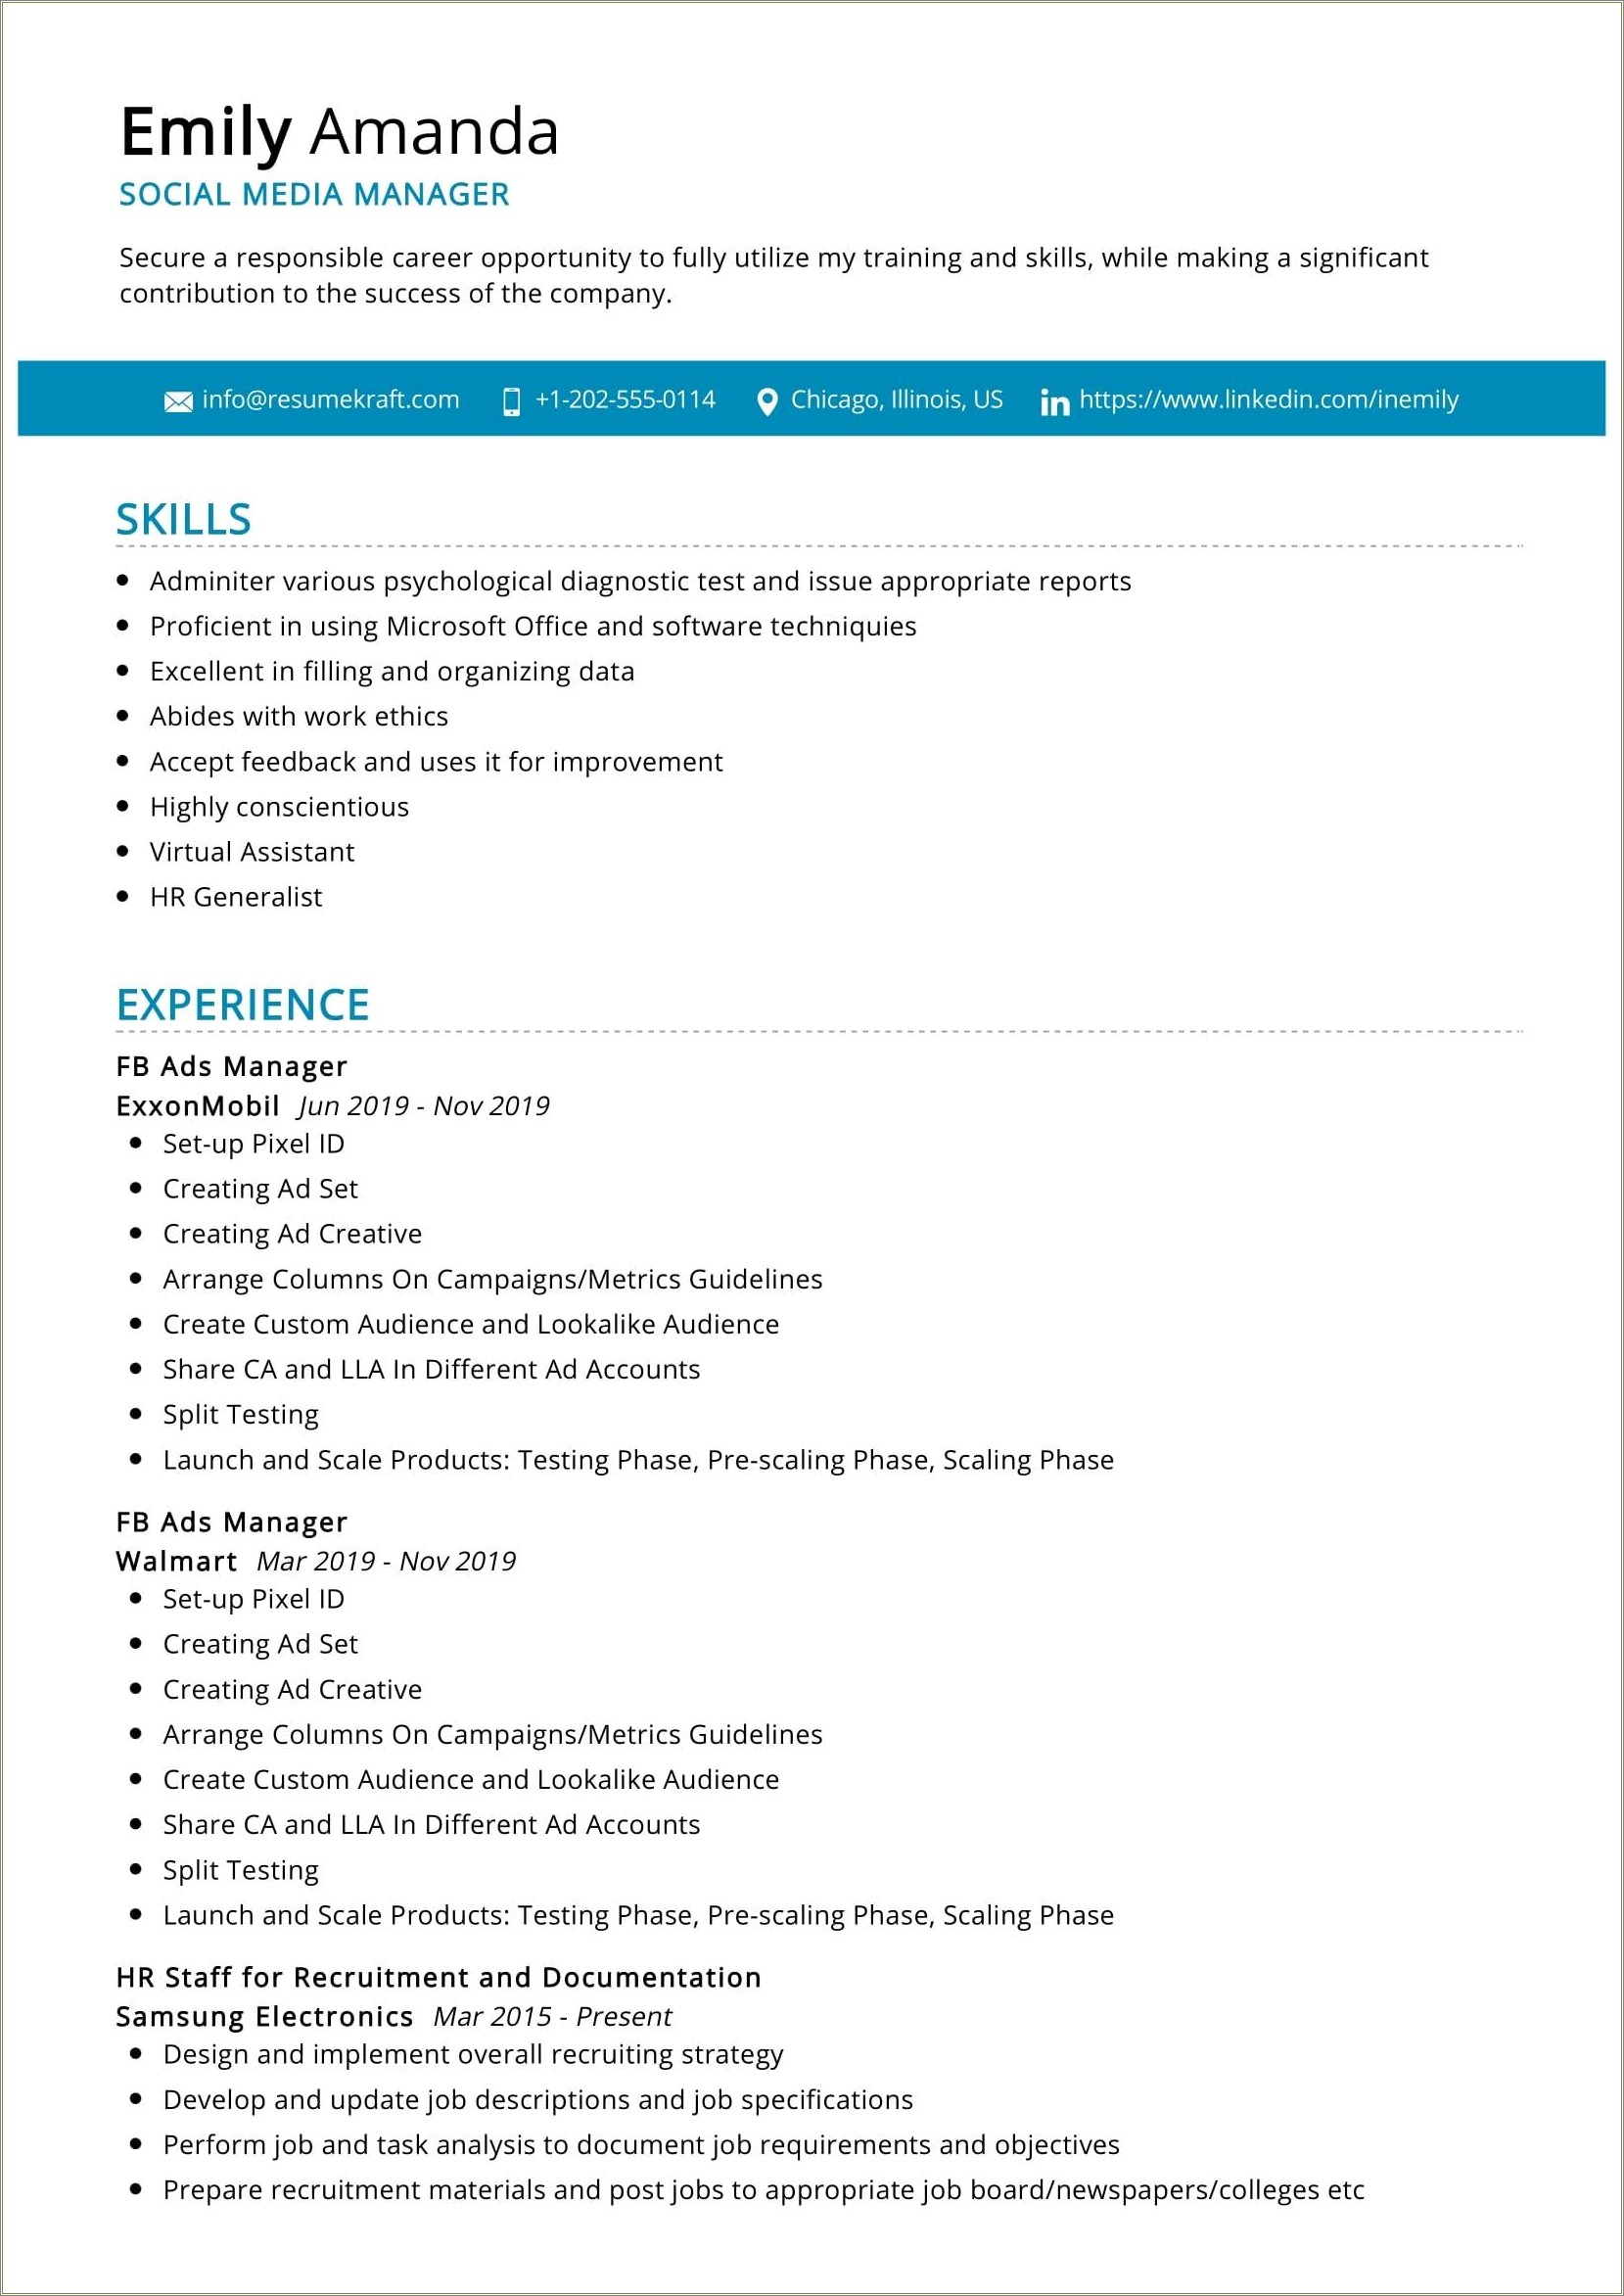 Sample Recruiting Manager Resume In Usa